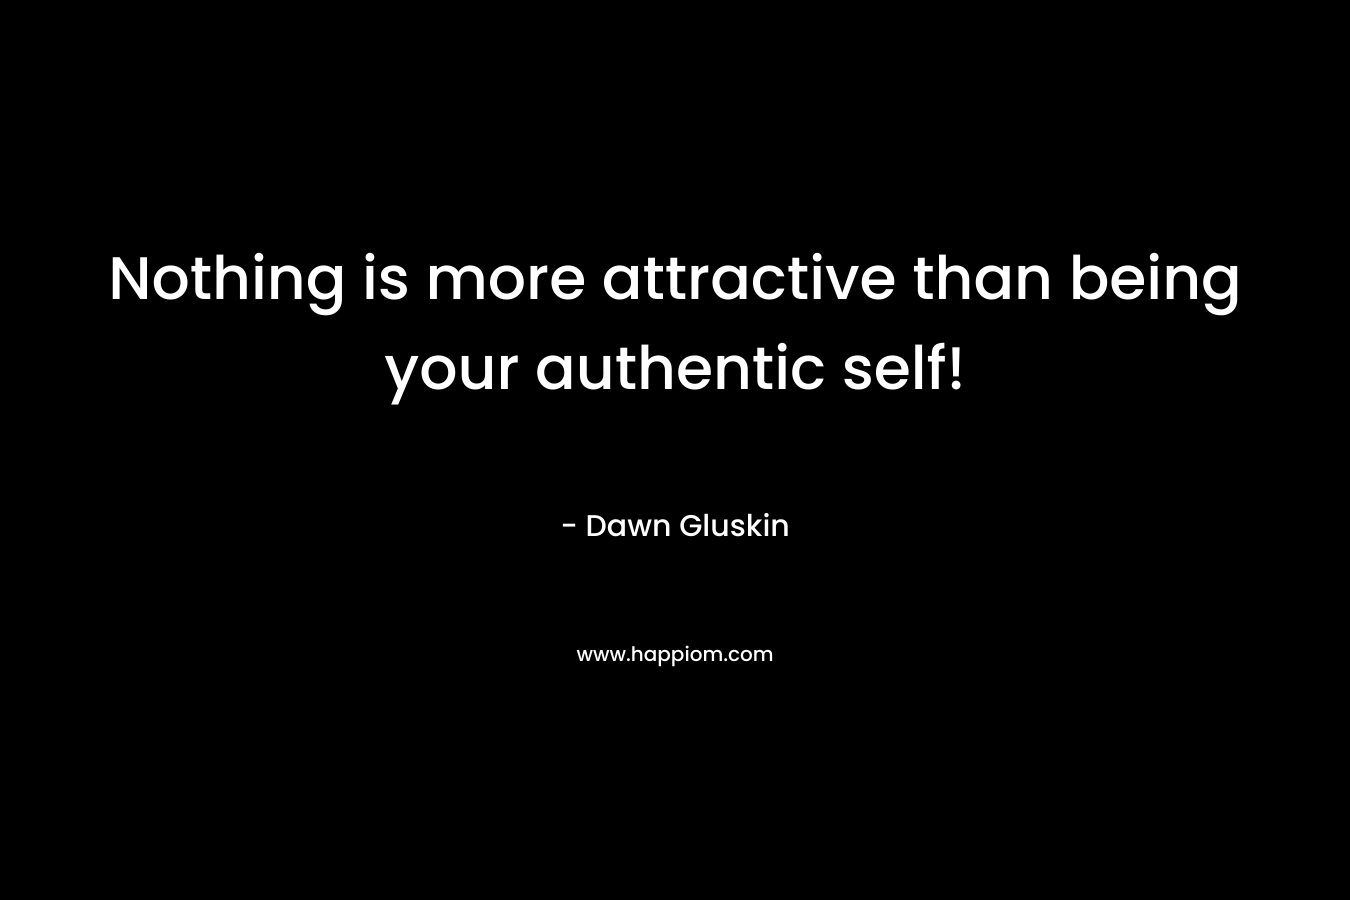 Nothing is more attractive than being your authentic self! – Dawn Gluskin